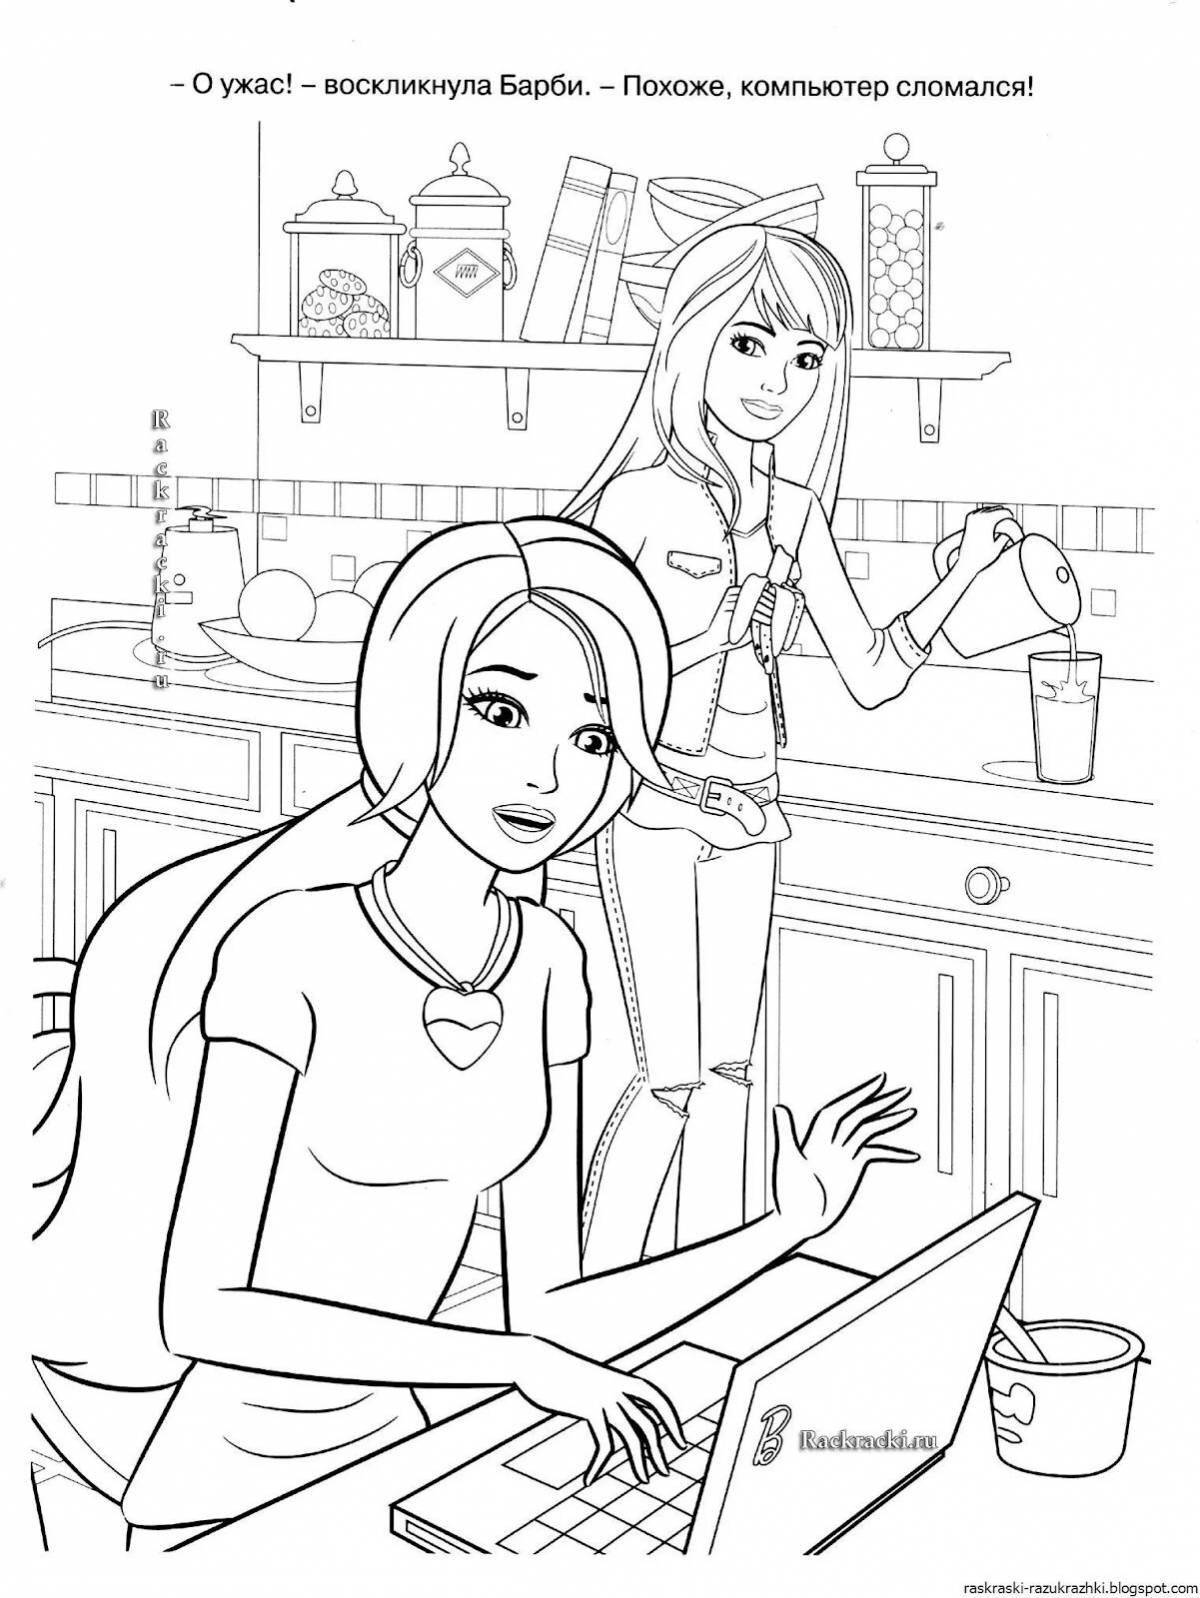 Glorious Yandex coloring book for girls